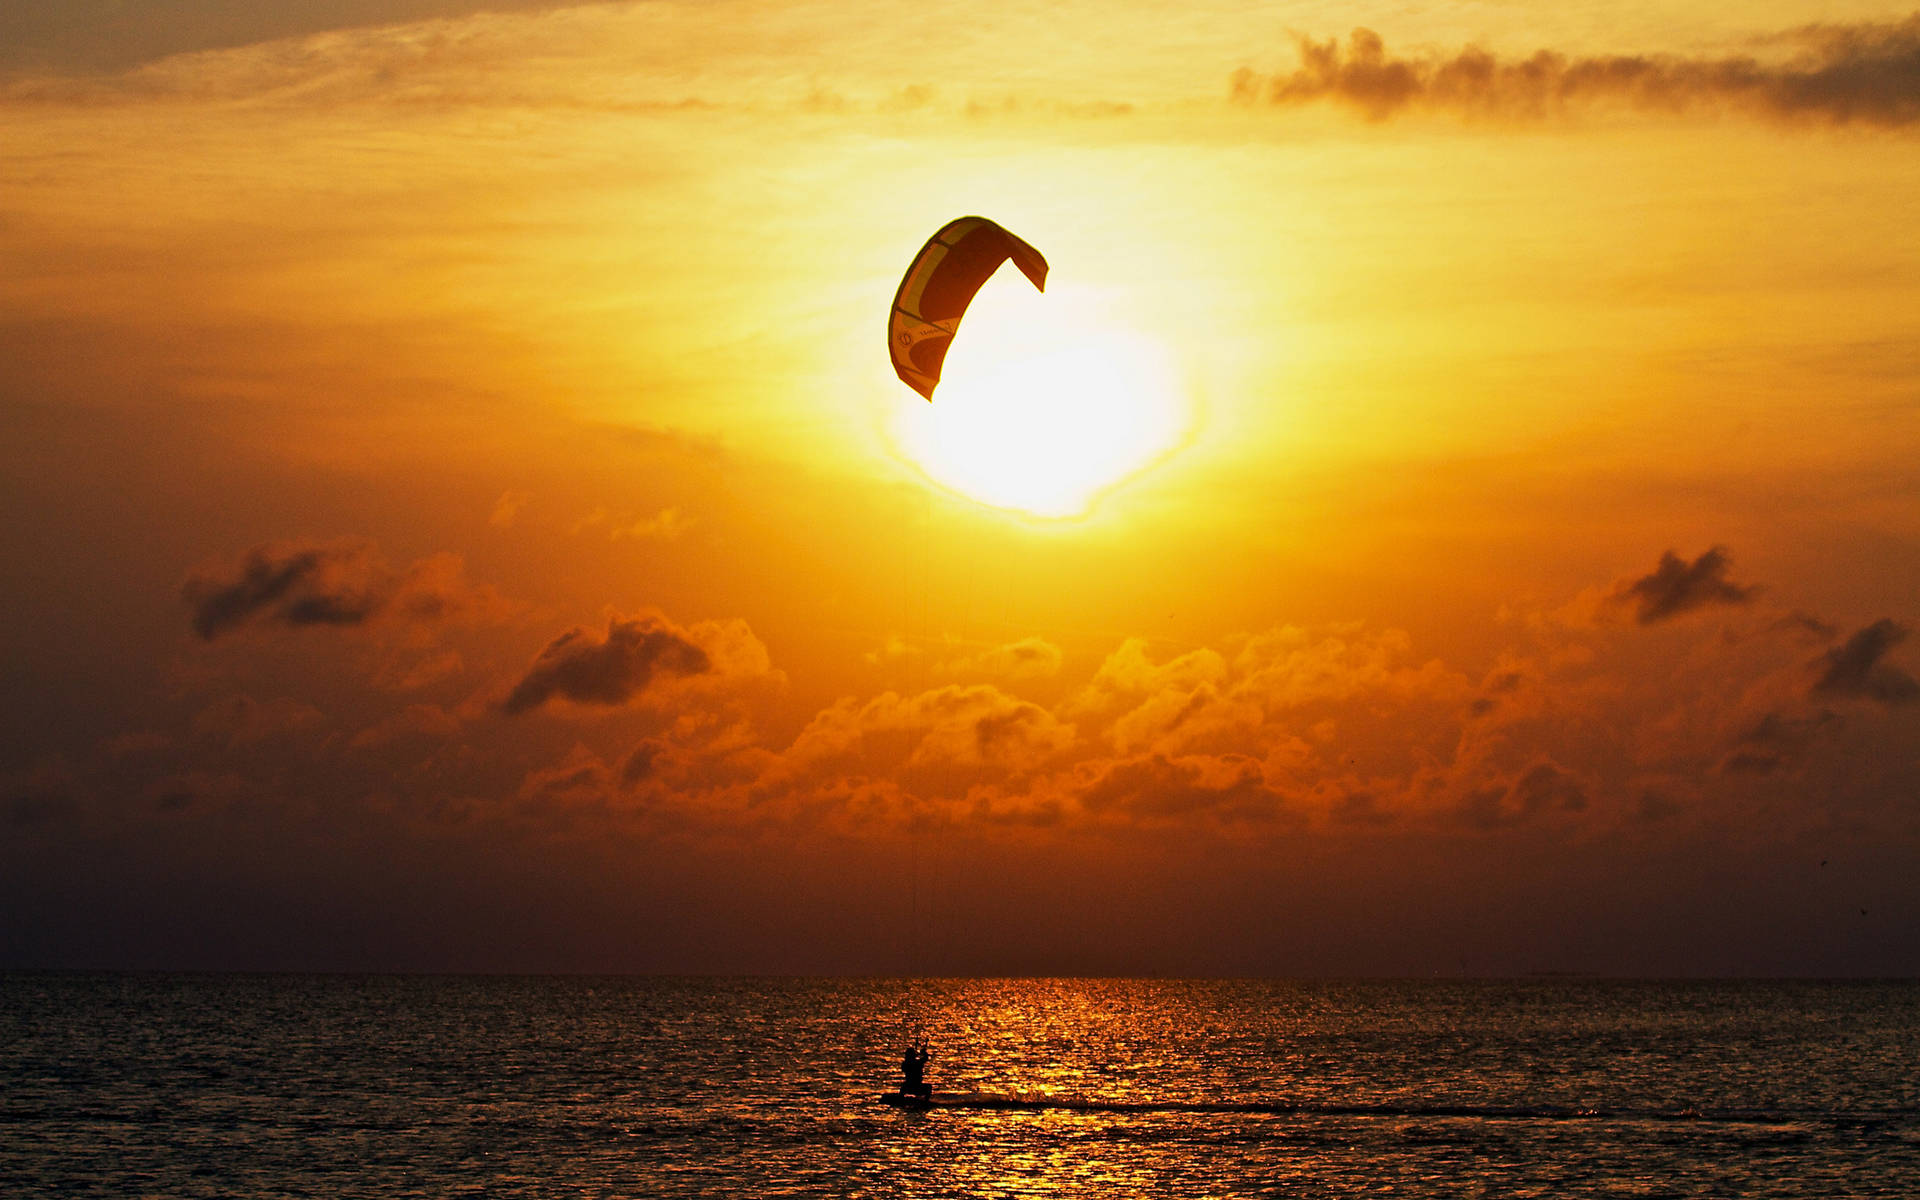 Parasailing With The View Of The Sunset Wallpaper